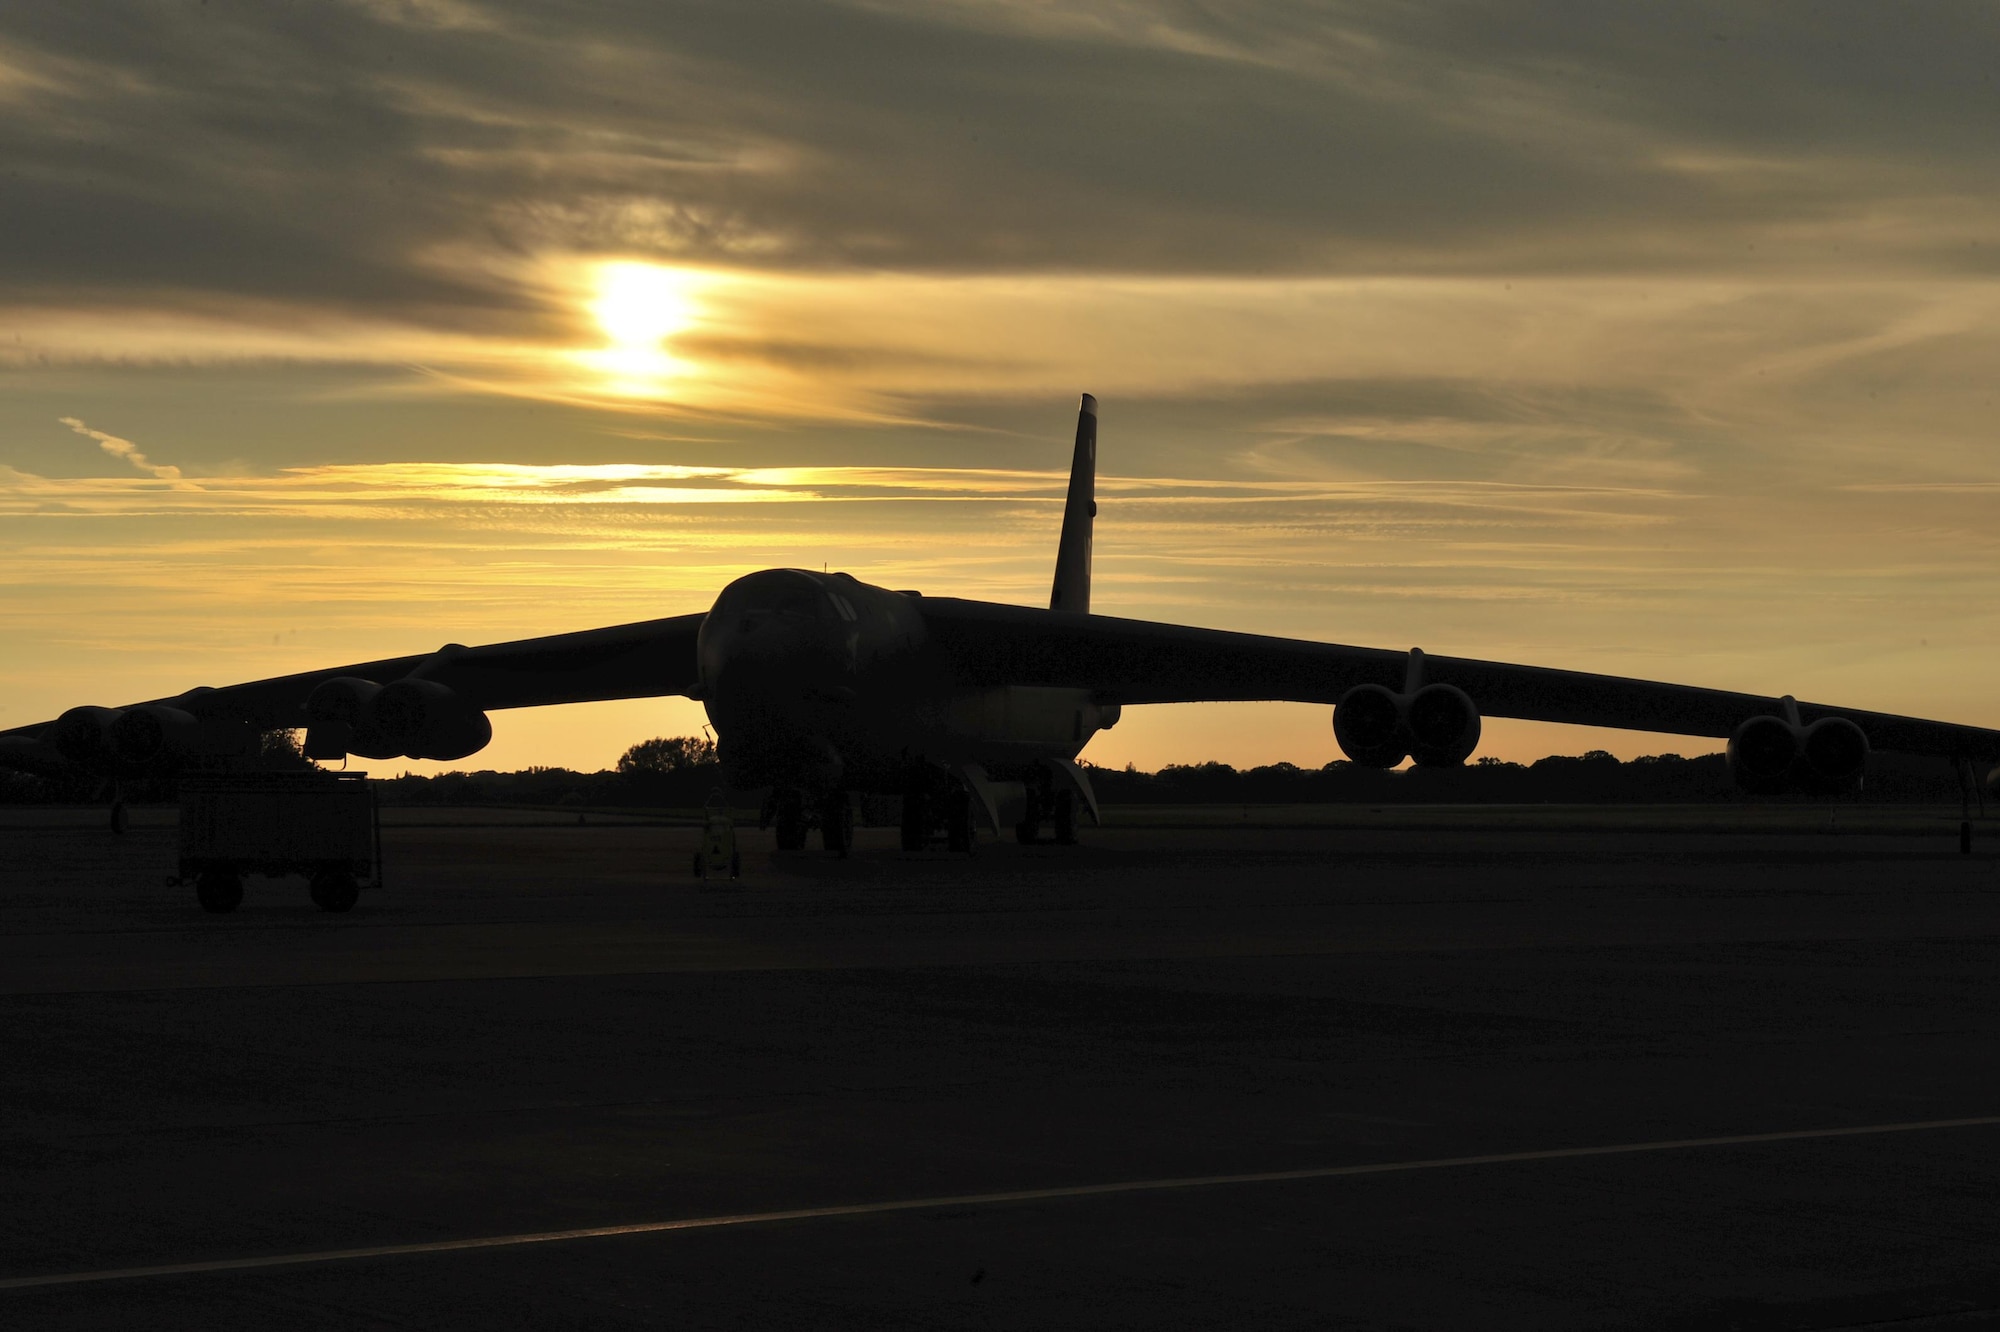 A B-52H Stratofortress forward deployed to Royal Air Force Fairford, England, awaits a training mission in support of either, BALTOPS or Saber Strike. The focus of Saber Strike is to promote interoperability with regional partners and improve joint operational capabilities in a variety of missions. The goal of BALTOPS is to promote mutual understanding, confidence, cooperation and interoperability among forces and personnel of participating nations. (U.S. Air Force photo/Senior Airman Malia Jenkins)